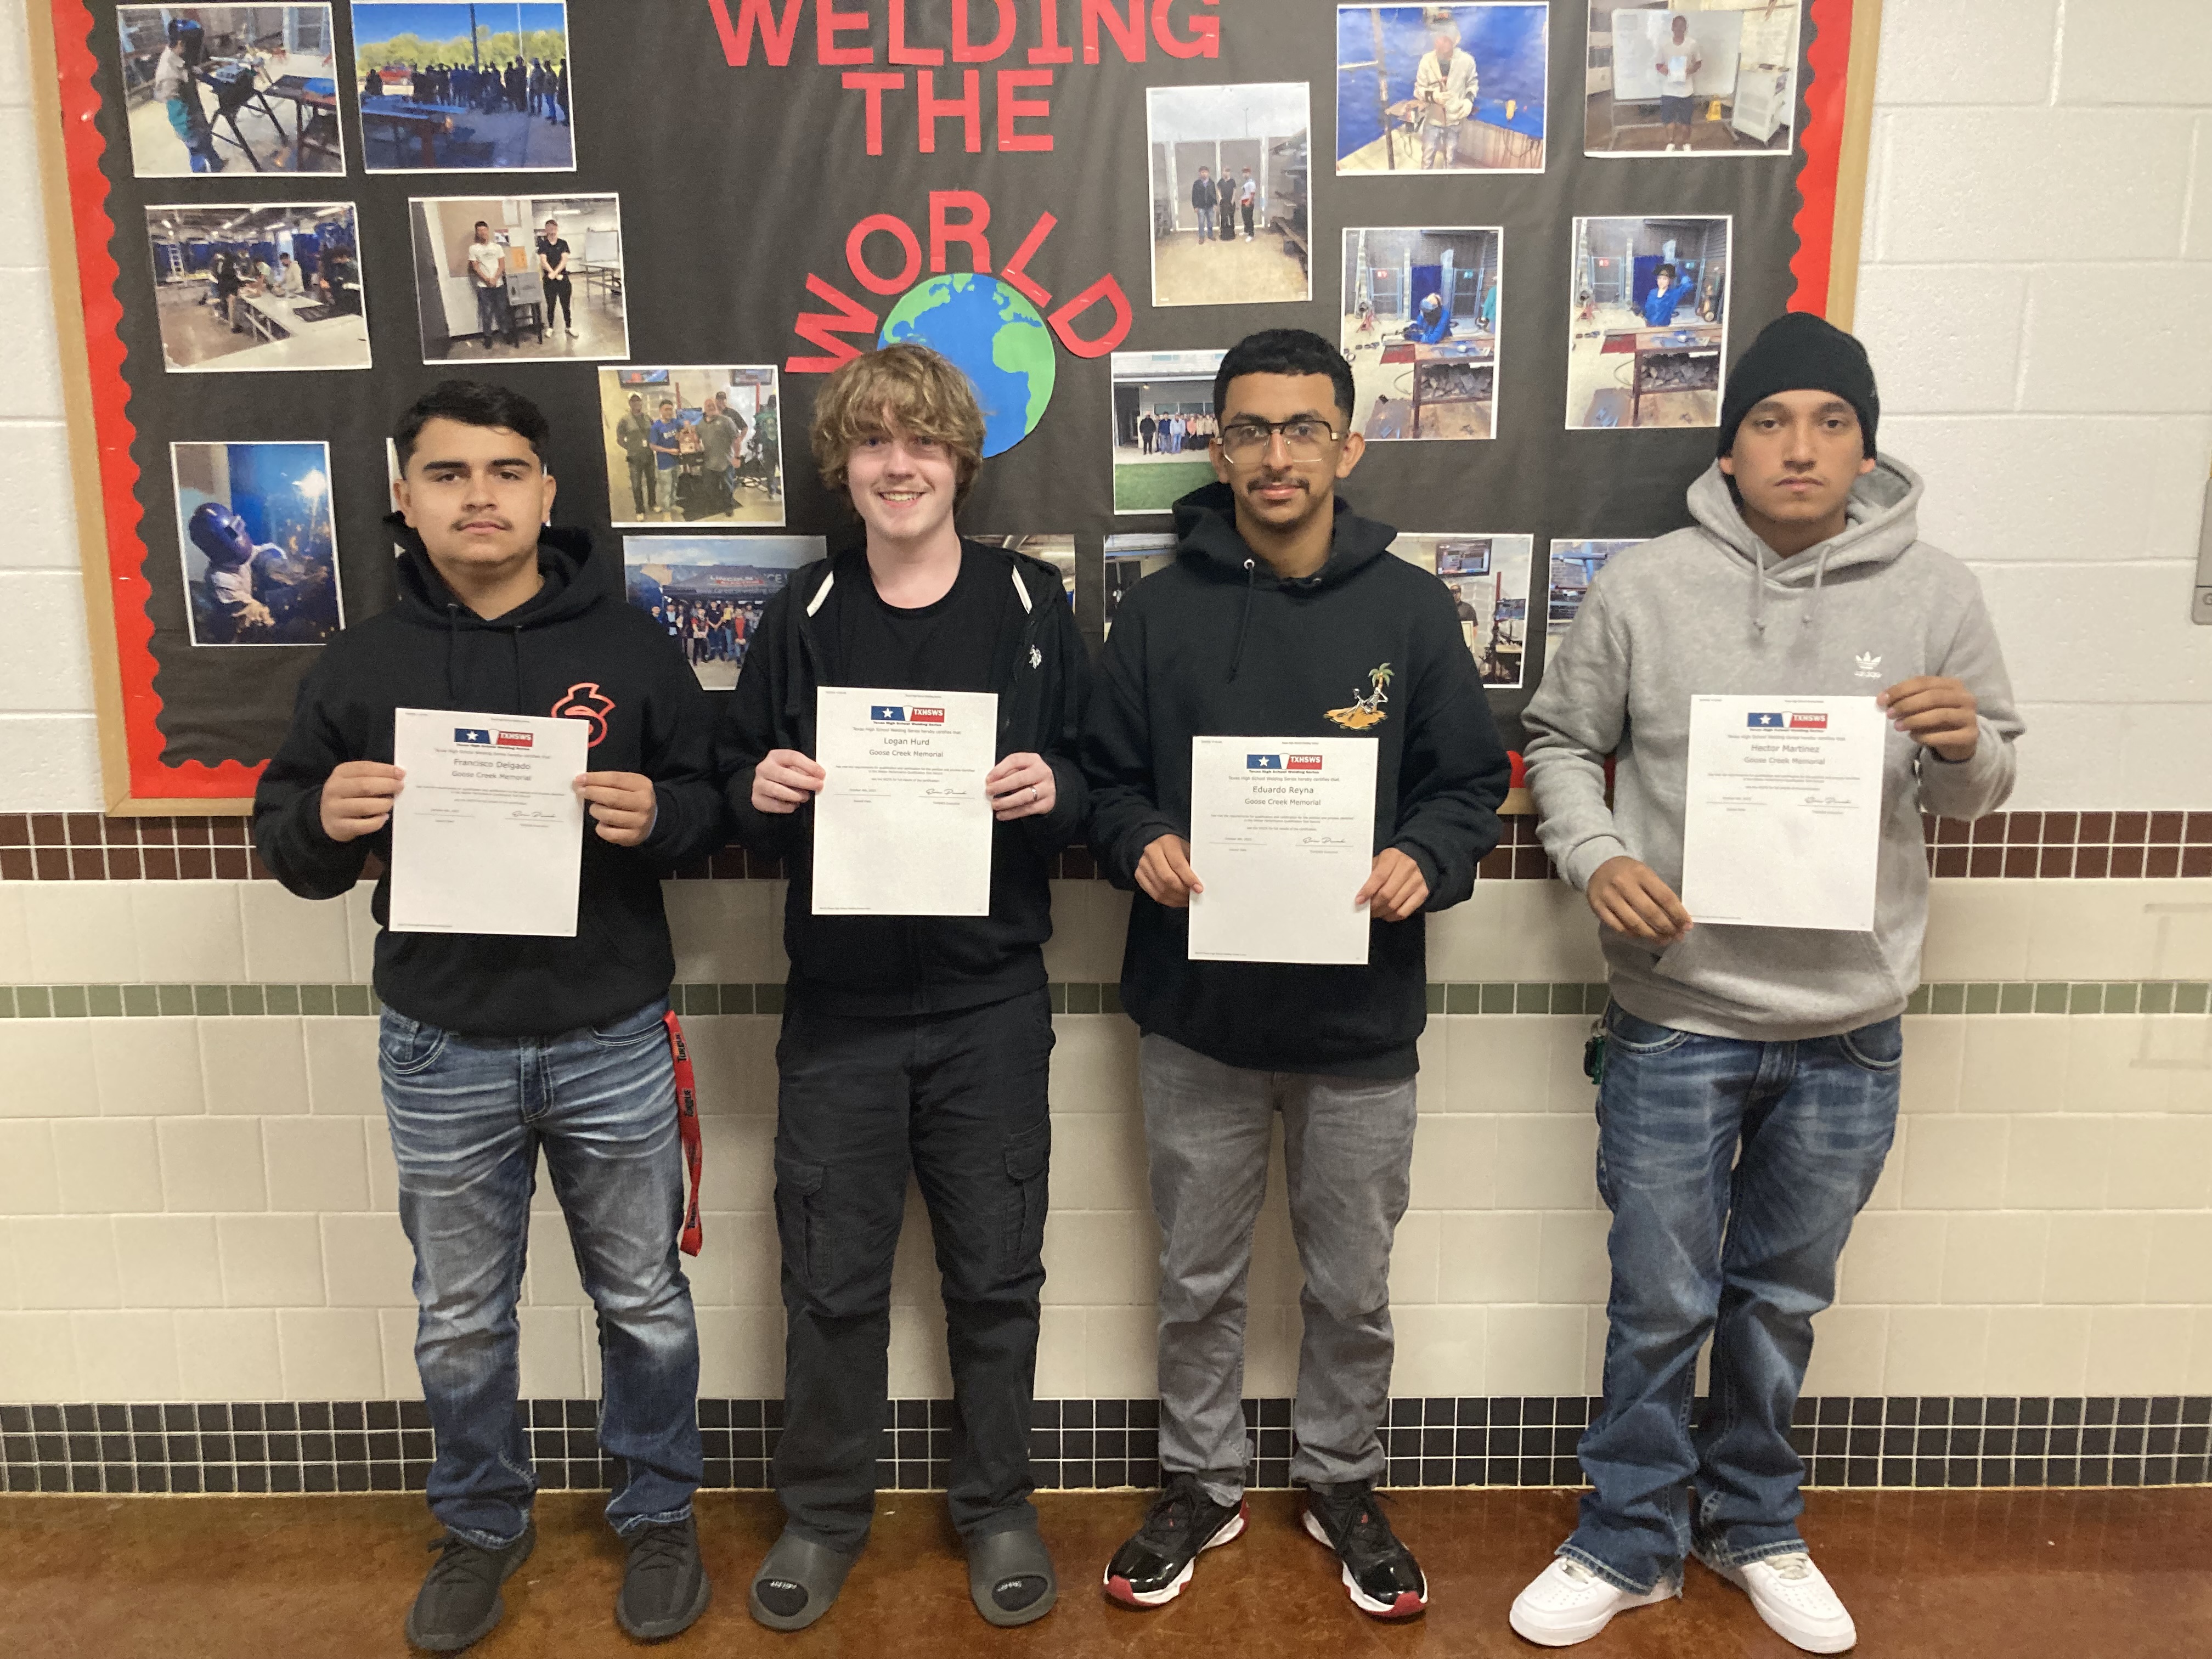 Welding students pose with their awards